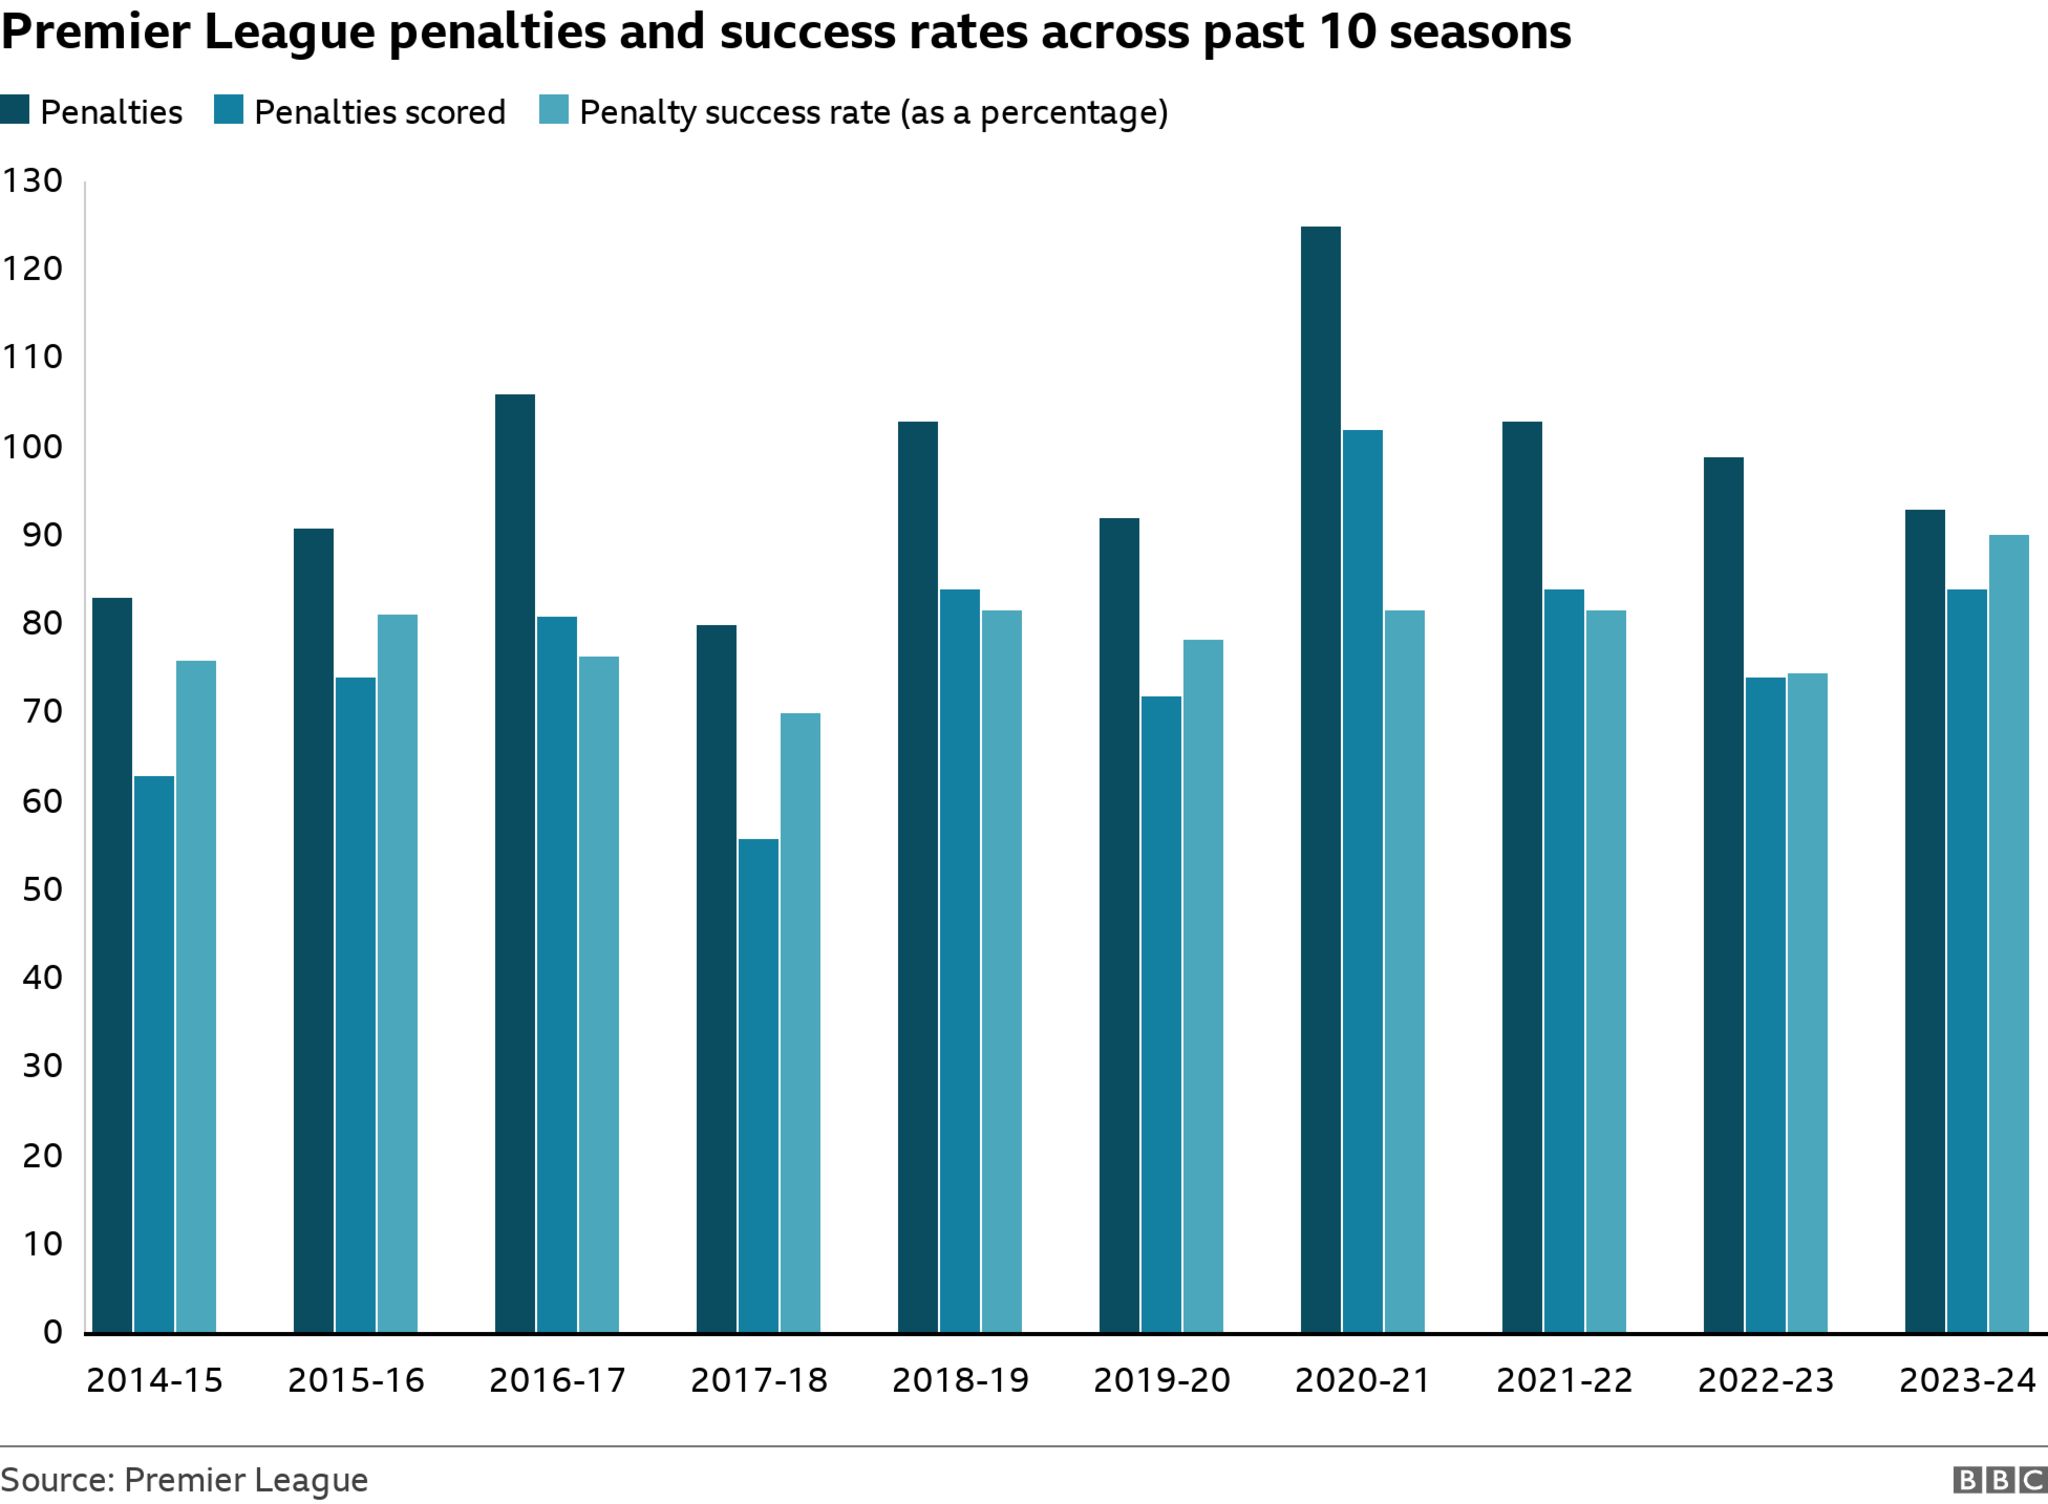 Premier League penalties and success rates over time